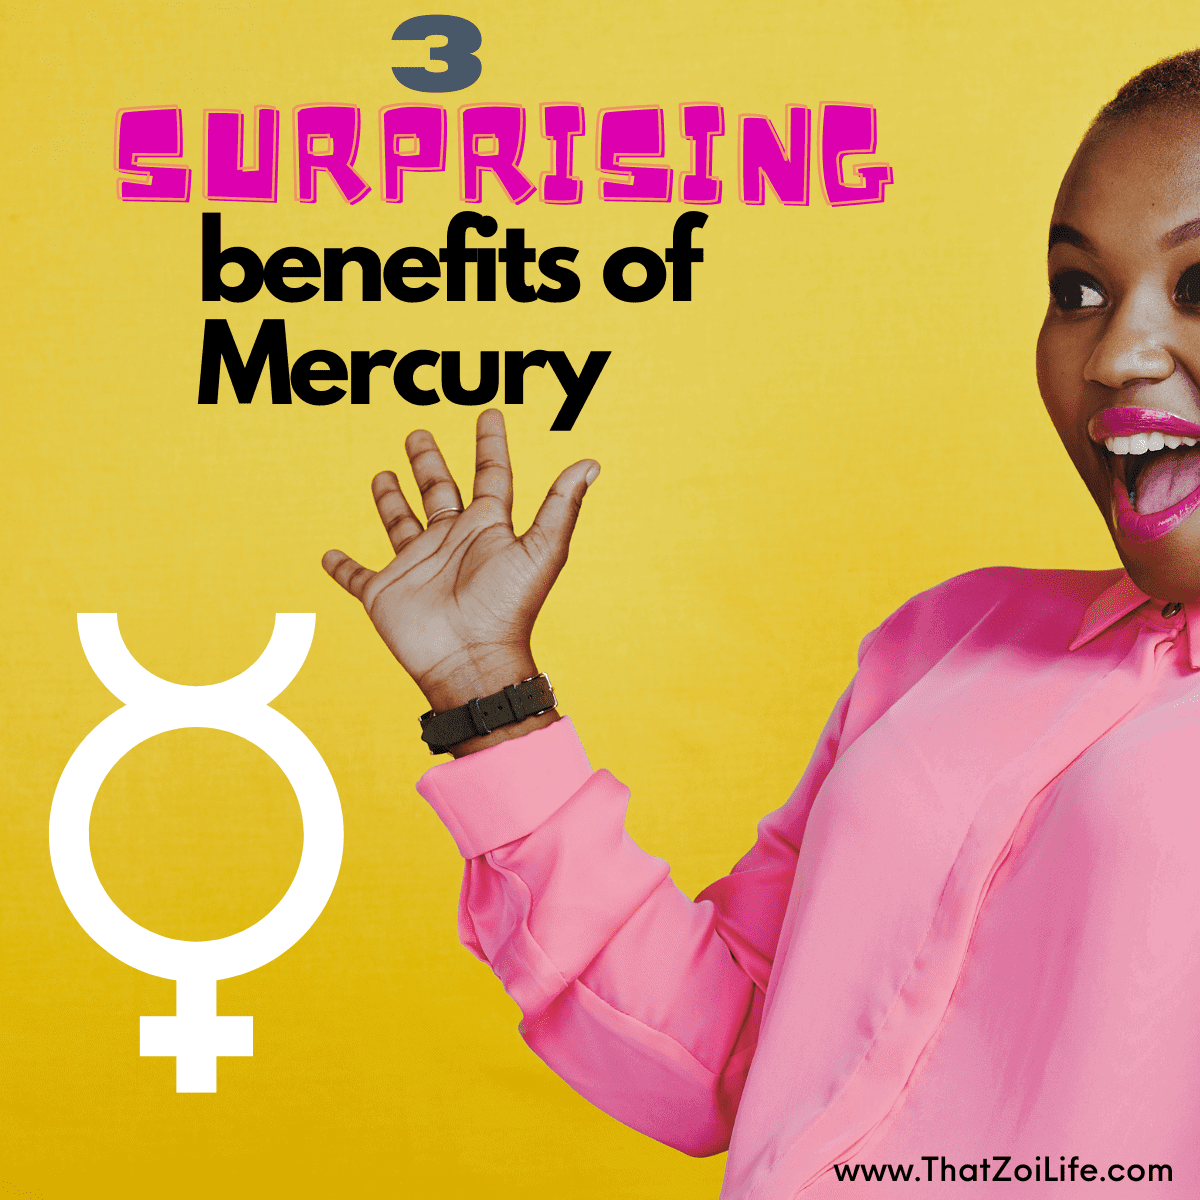 A young black woman looks surprised. Text reads "3 surprising benefits of Mercrury. www.ThatZoiLife.com" There is a large zodiac glyph for the planet Mercury at the bottom right corner